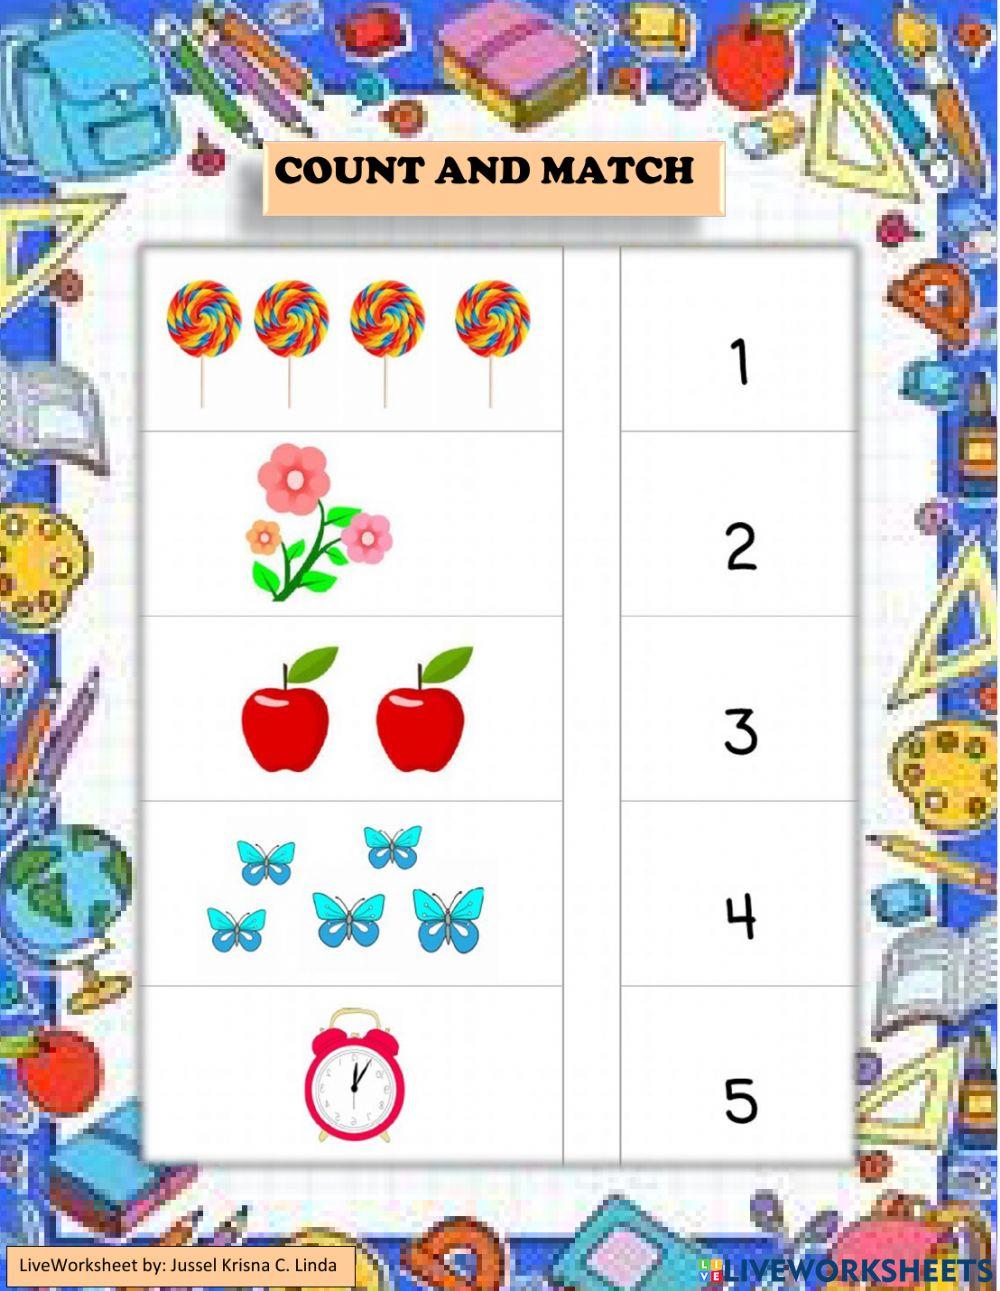 COUNT AND MATCH (1-5), by: Jussel Krisna C. Linda